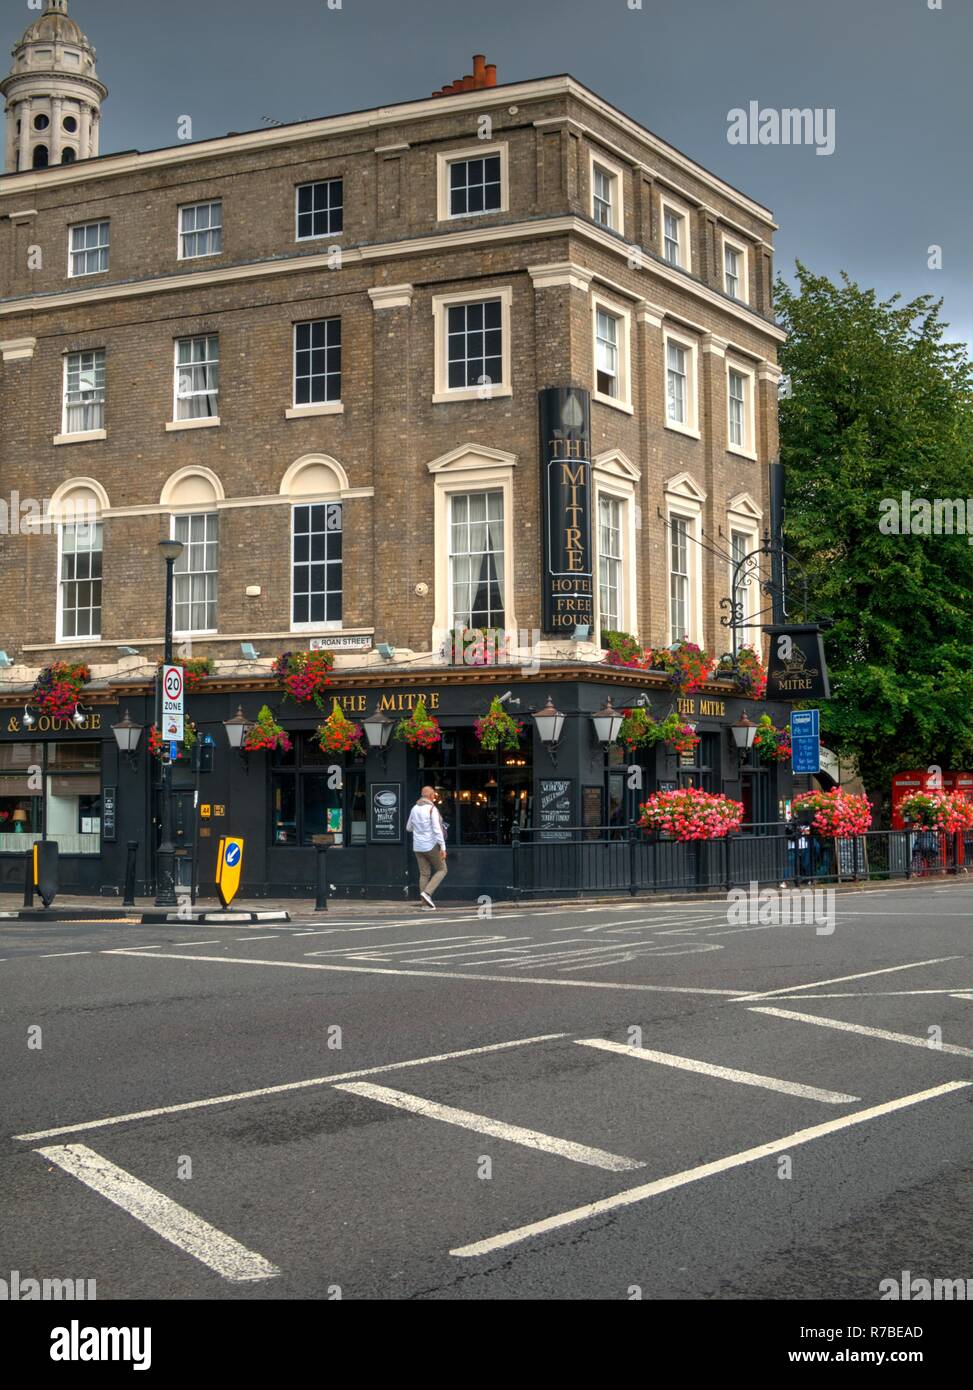 Greenwich, London, United Kingdom - August 13, 2018: Local public house called The Mitre Stock Photo